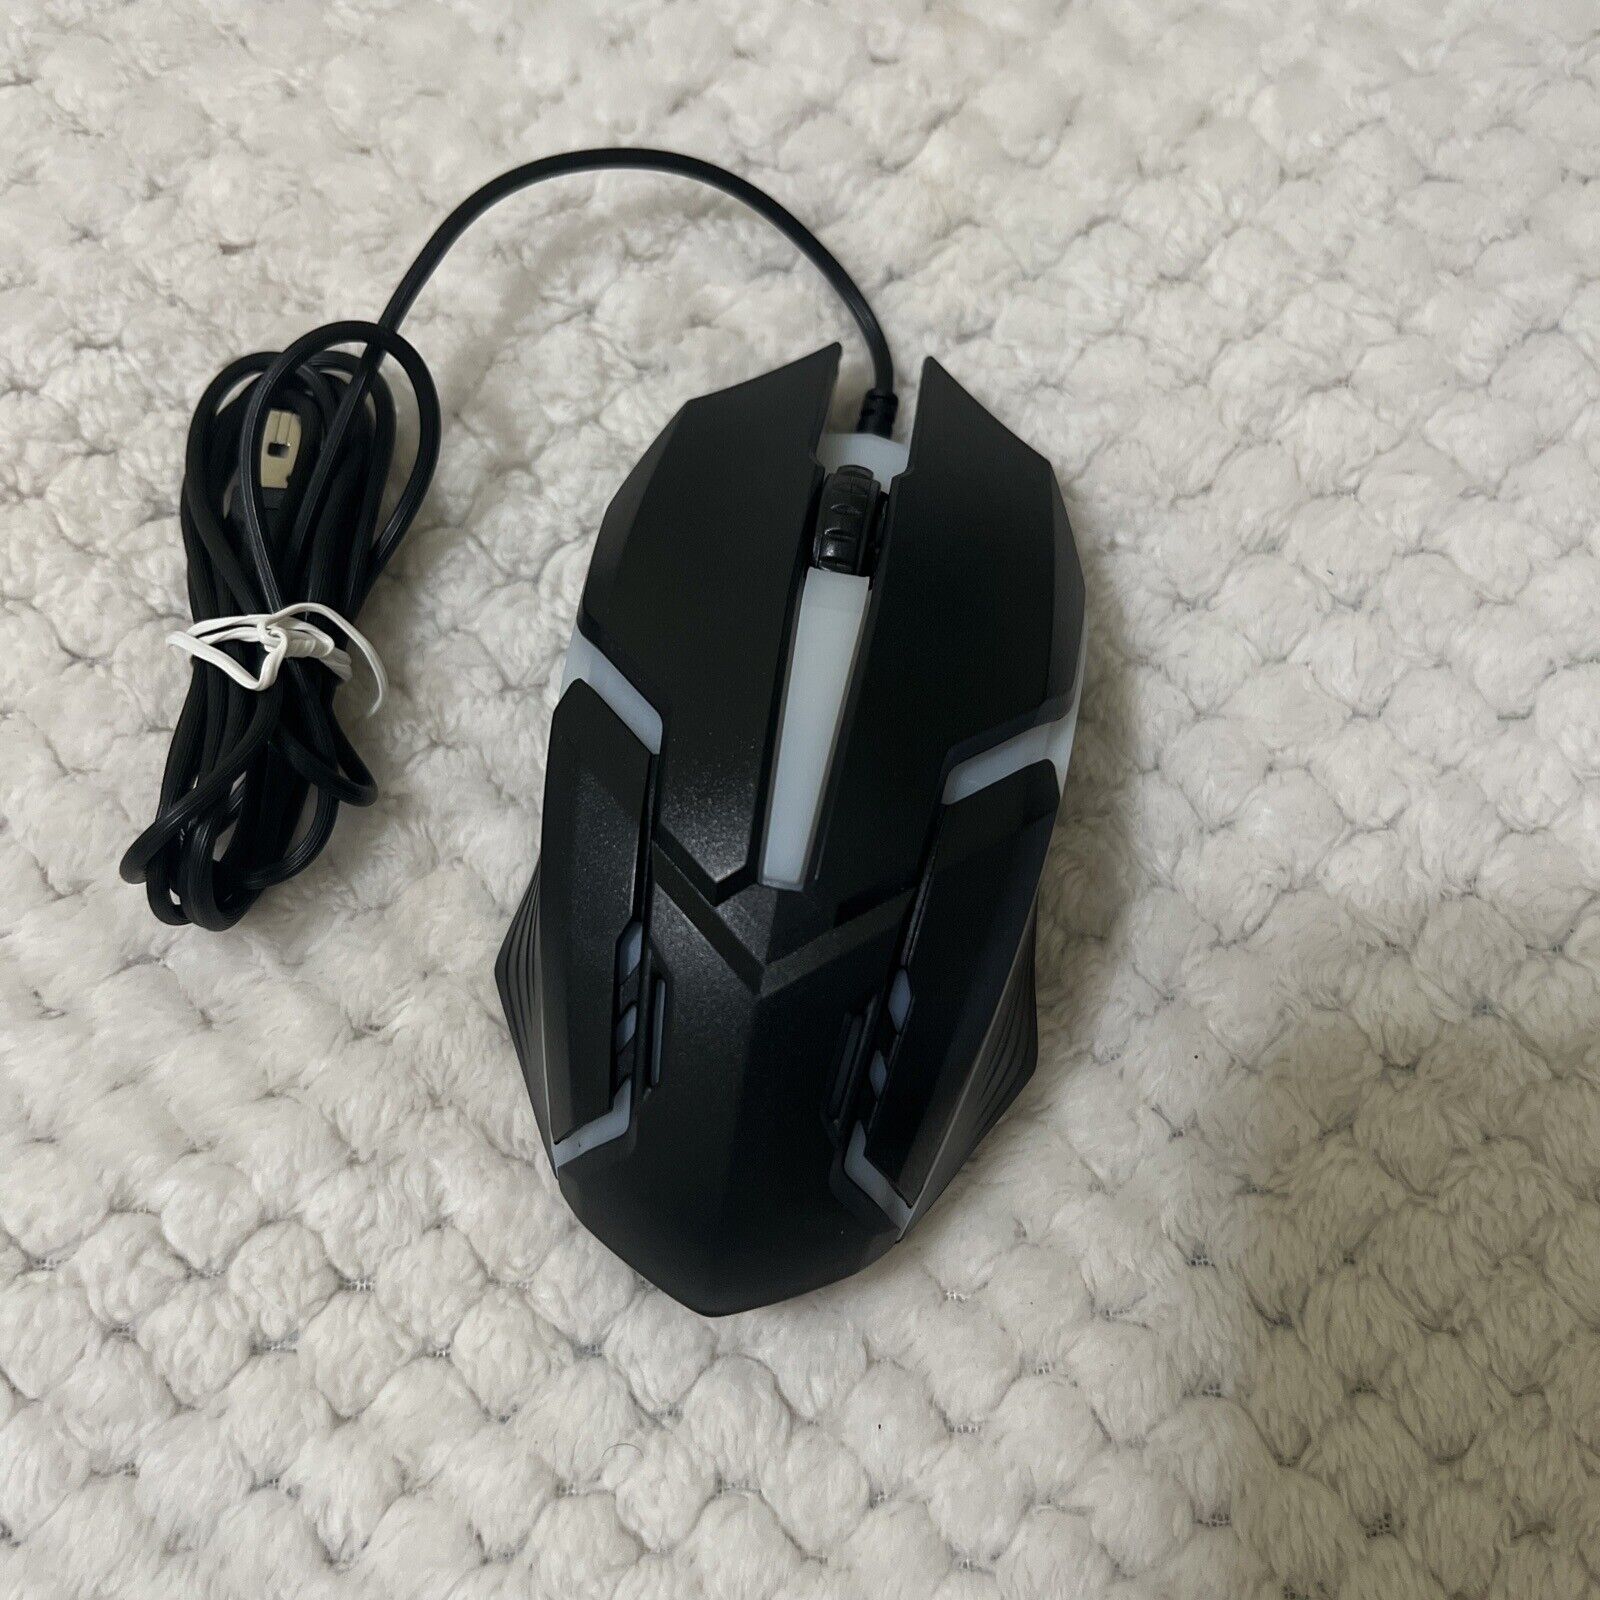 GAMING WIRED MOUSE / Youse Model:YU1538 T10